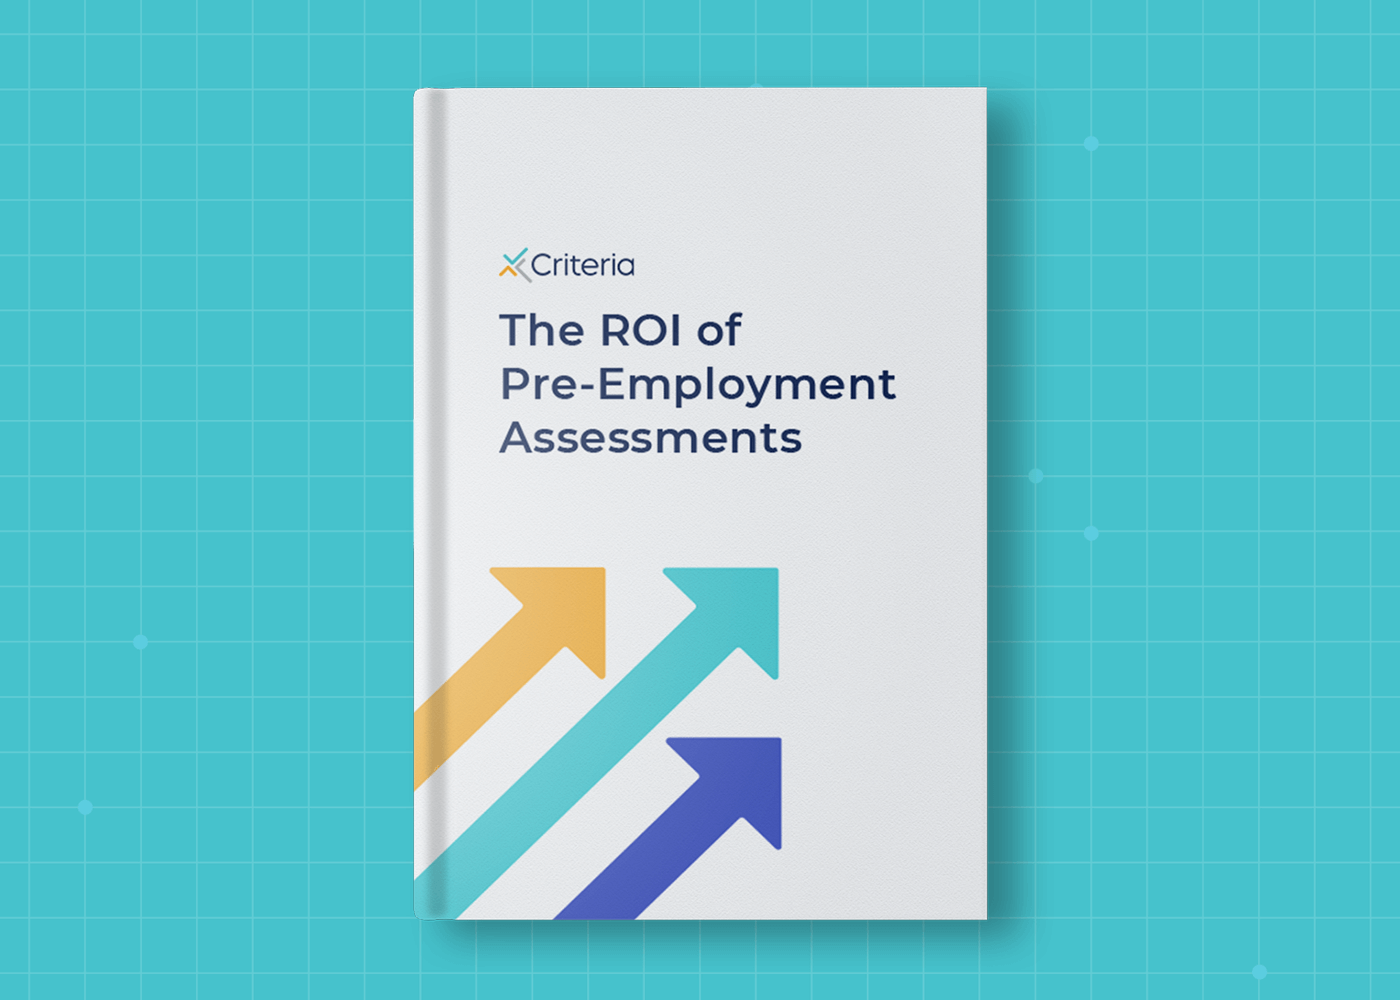 The ROI of Pre-Employment Assessments